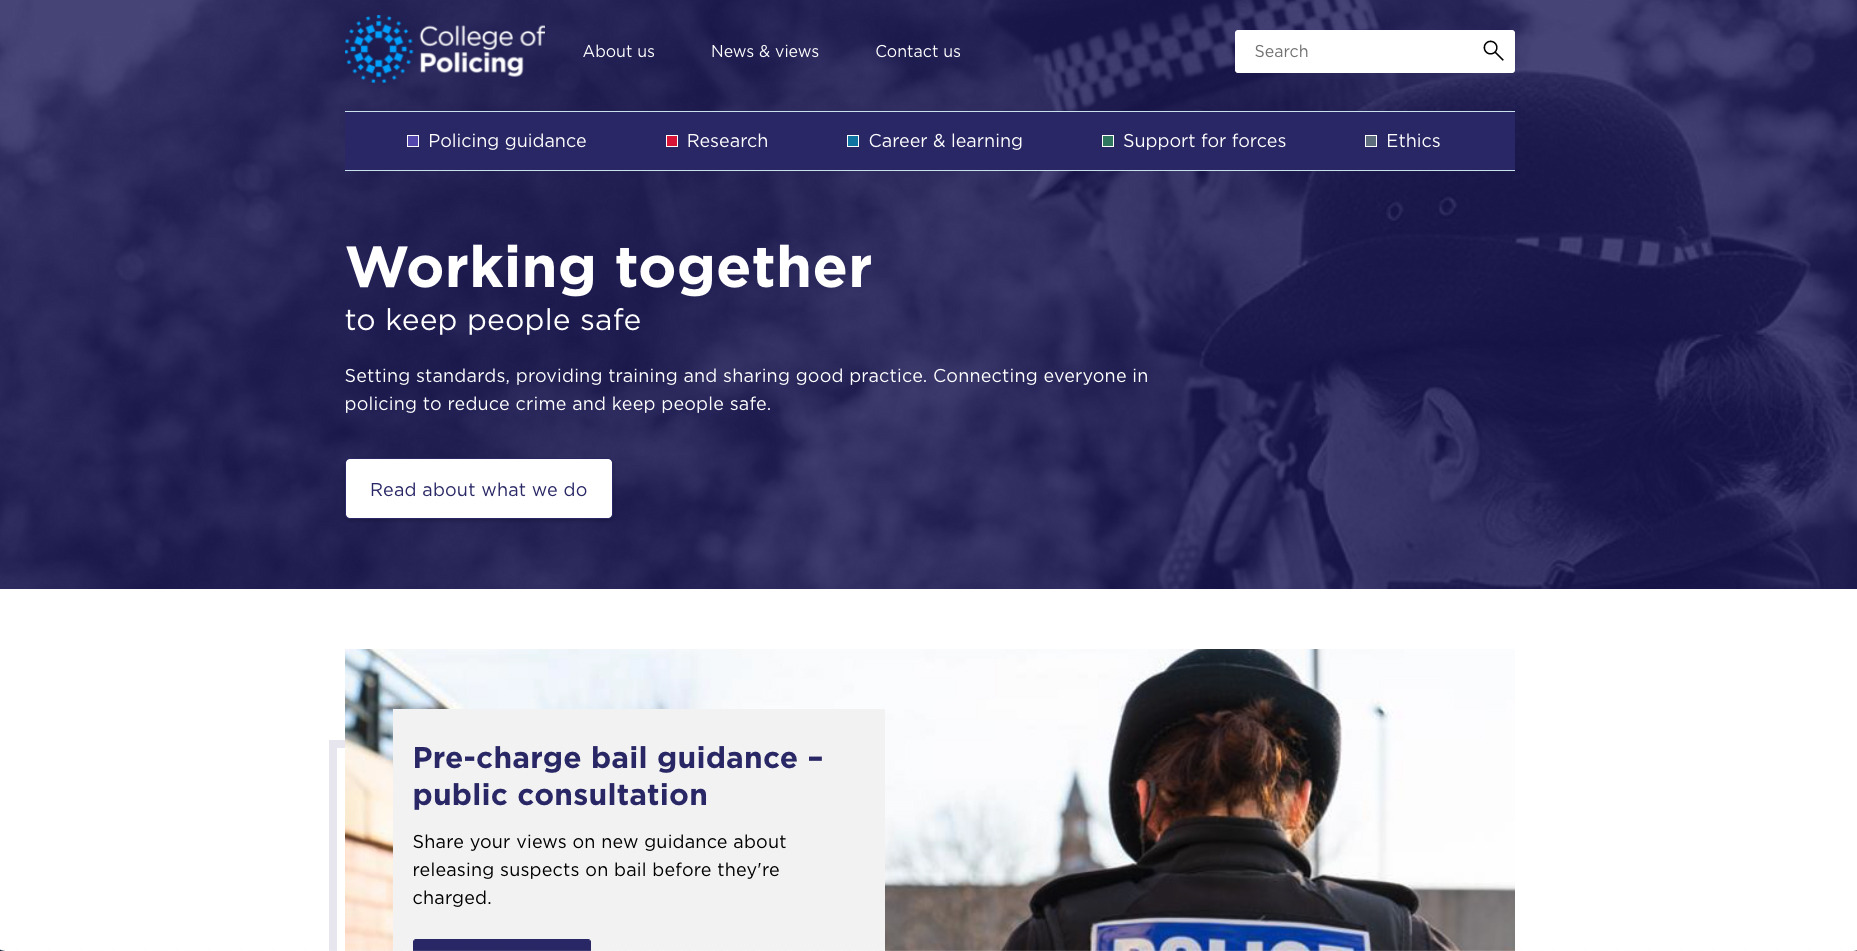 The new, accessible College of Policing home page, built using Drupal.